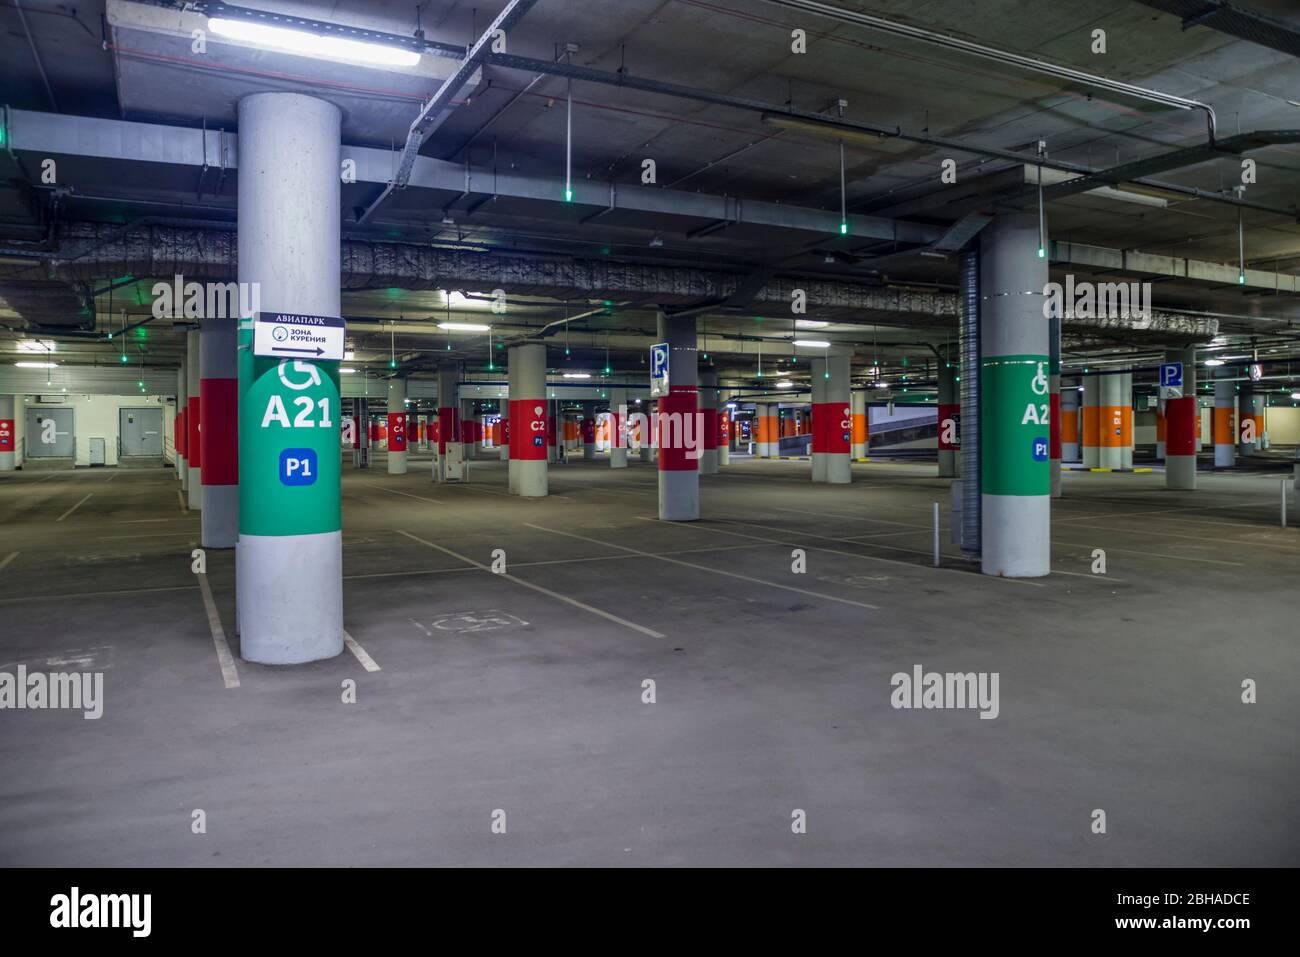 Moscow, Russia - April 22, 2020: Asphalt, dimly lit empty mall garage with ceiling lights. Stock Photo